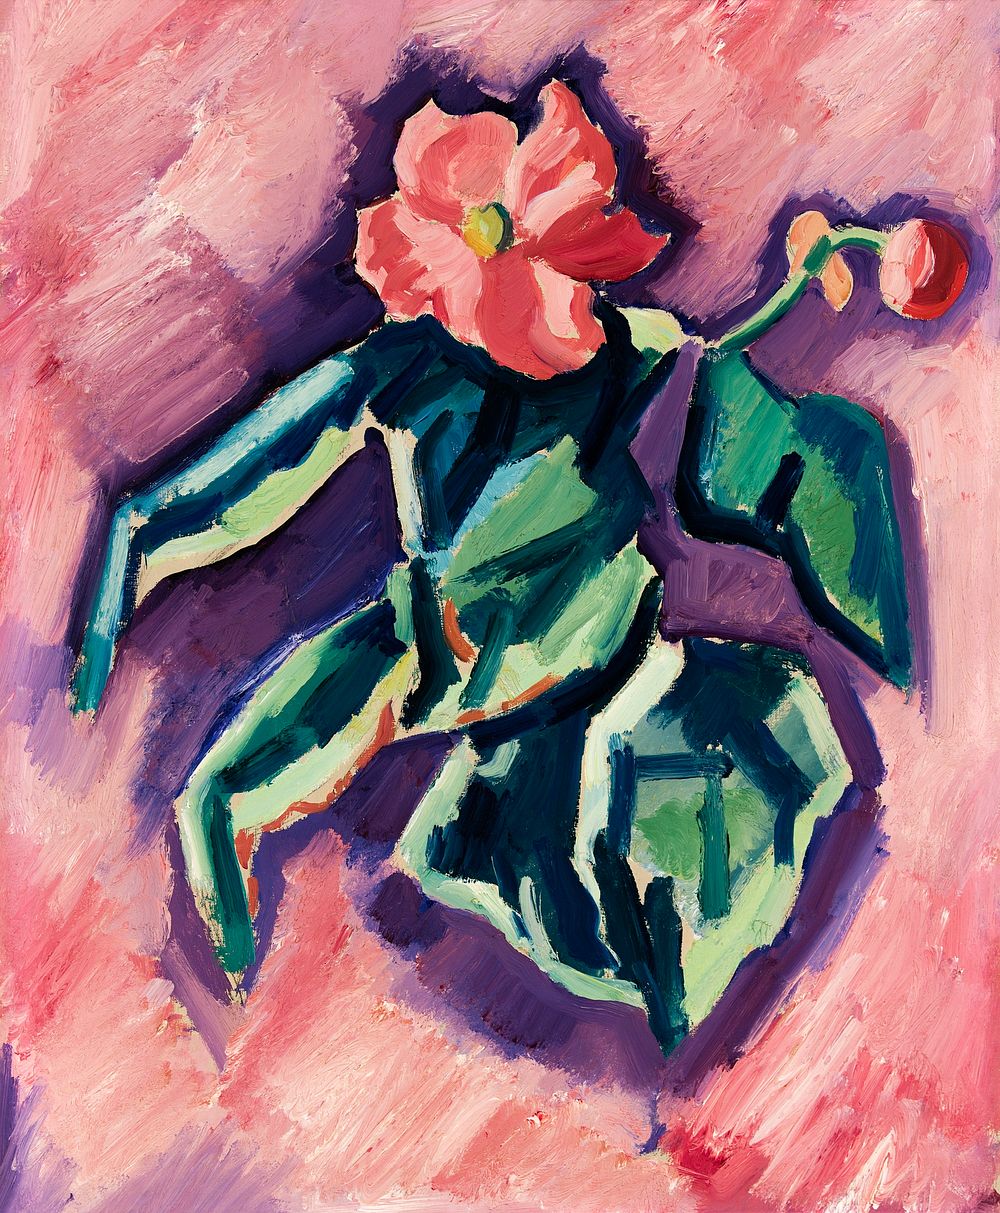 Pink Begonias (1928-1929) painting in high resolution by Marsden Hartley. Original from Smithsonian Institution. Digitally…